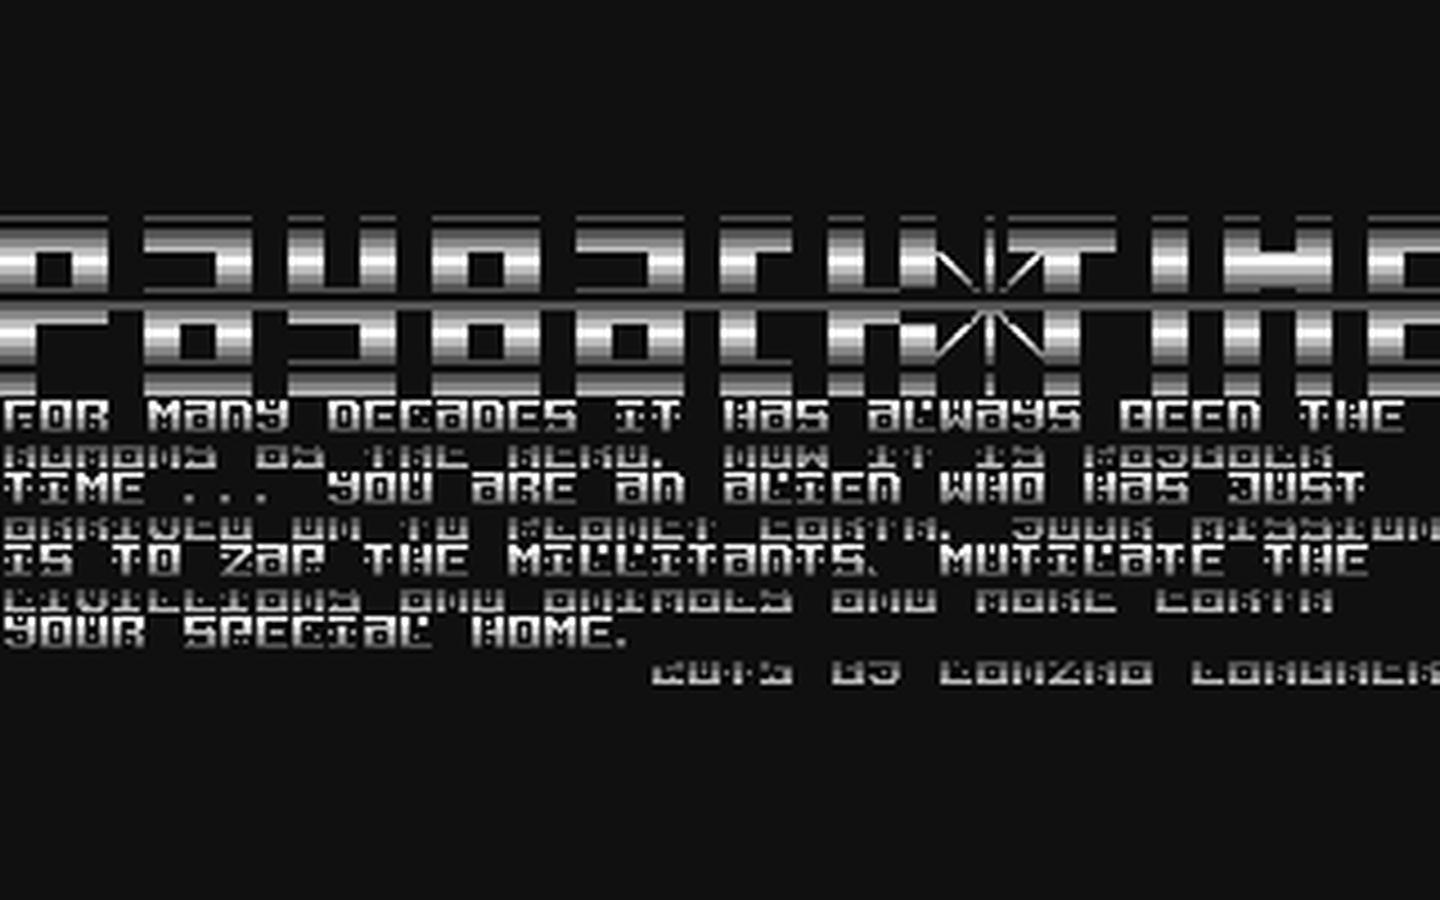 C64 GameBase Payback_Time (Created_with_SEUCK) 2015